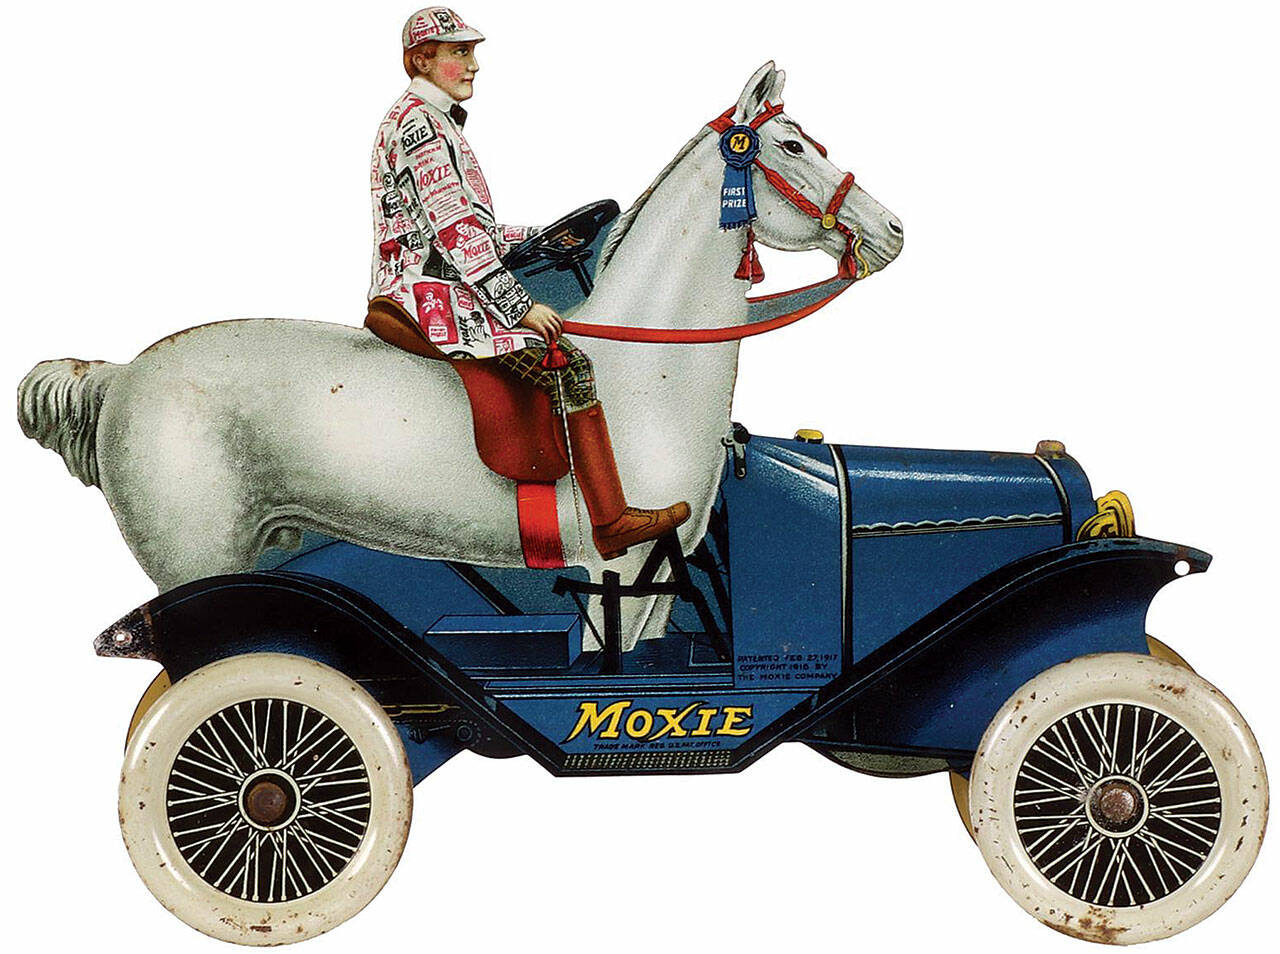 This toy car was a clever ad for Moxie, a soft drink popular in New England. It sold for $2,600. (Cowles Syndicate Inc.)